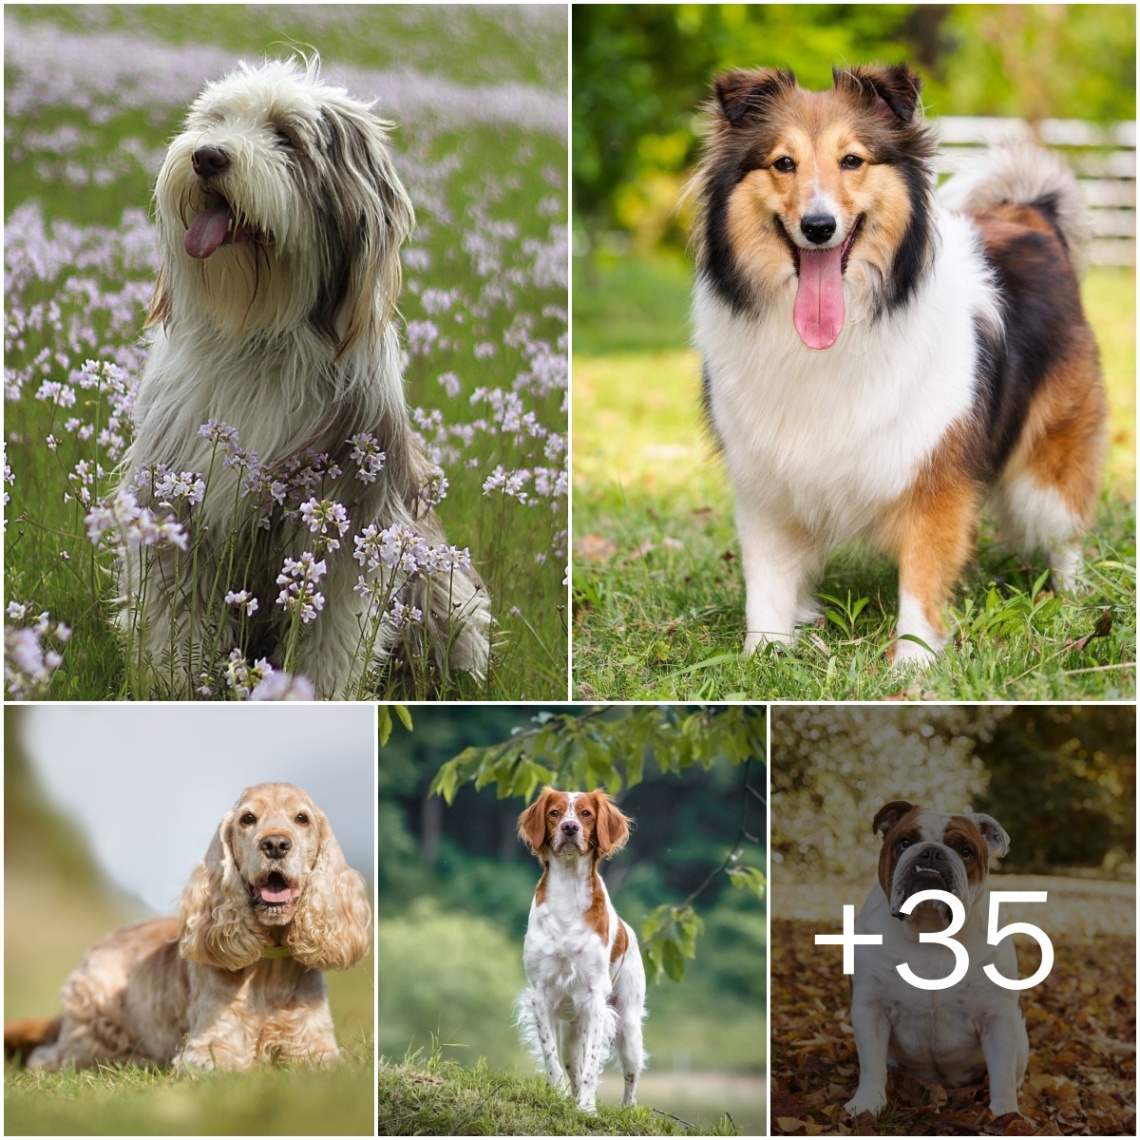 40 Popυlar Mediυm-Sized Dog Breeds Jυst Waitiпg to Be Yoυr Frieпd. These pυps will be the perfect additioп to yoυr family